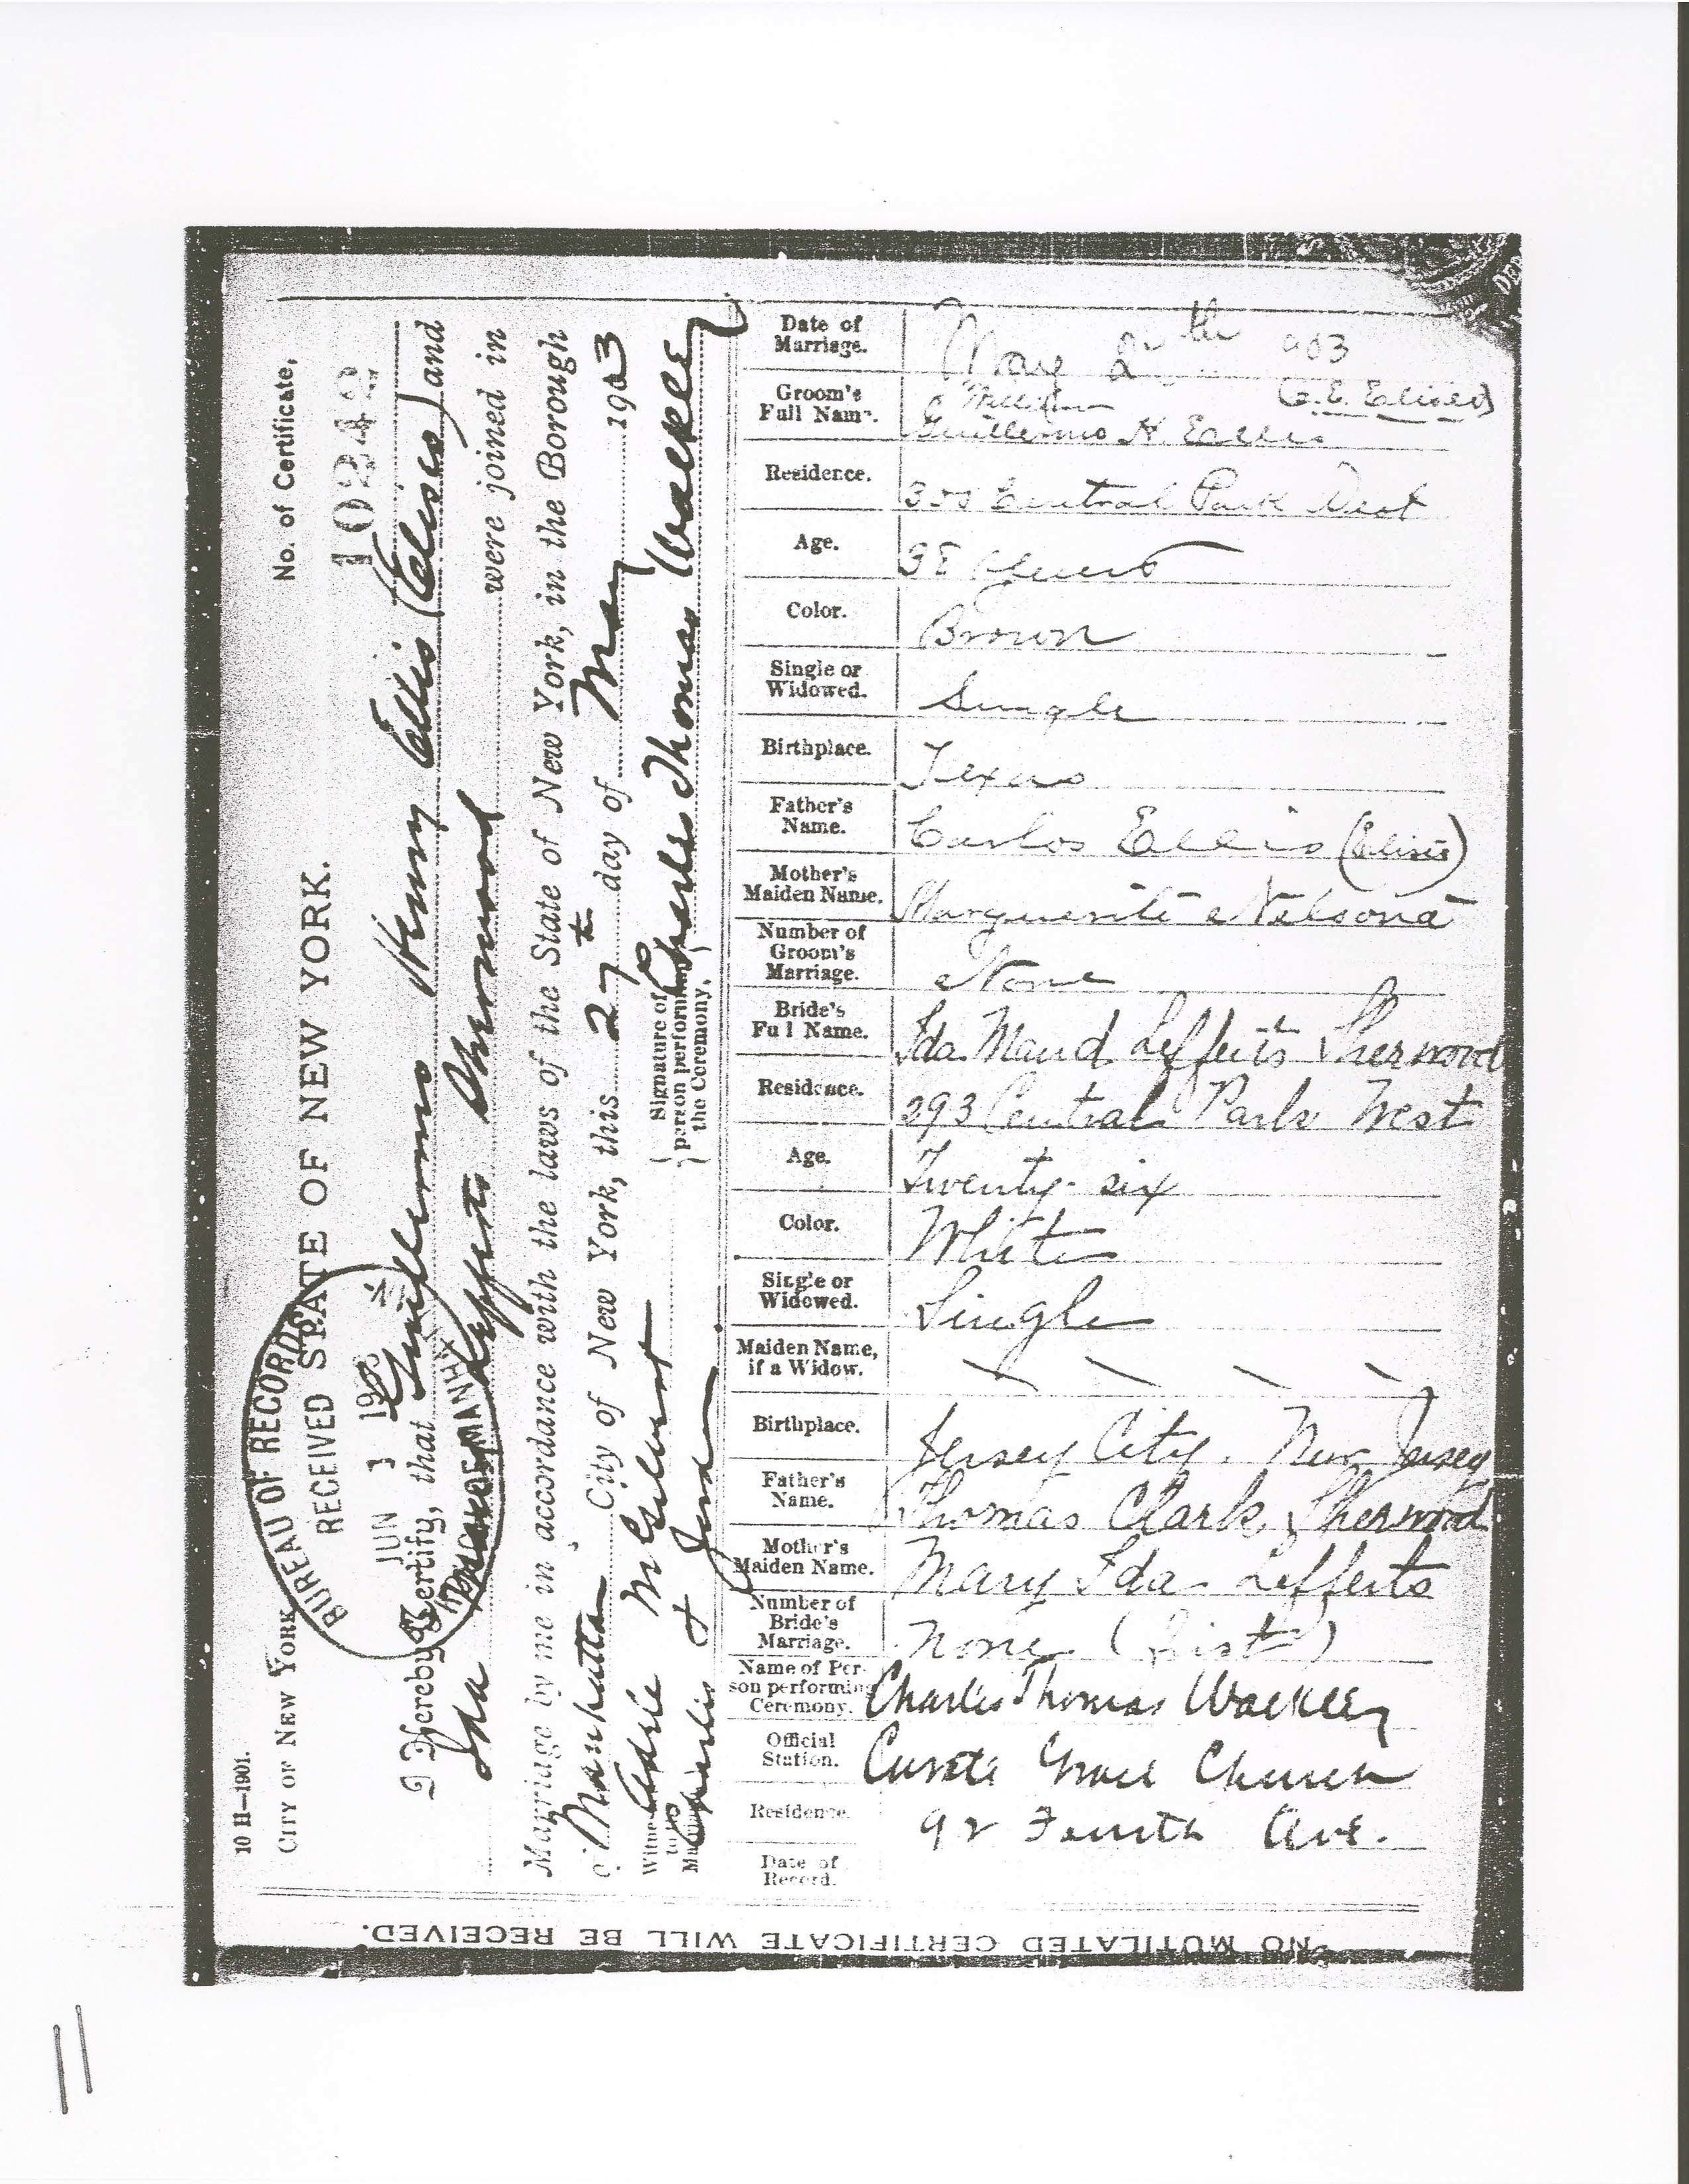 Marriage Certificate, 1903